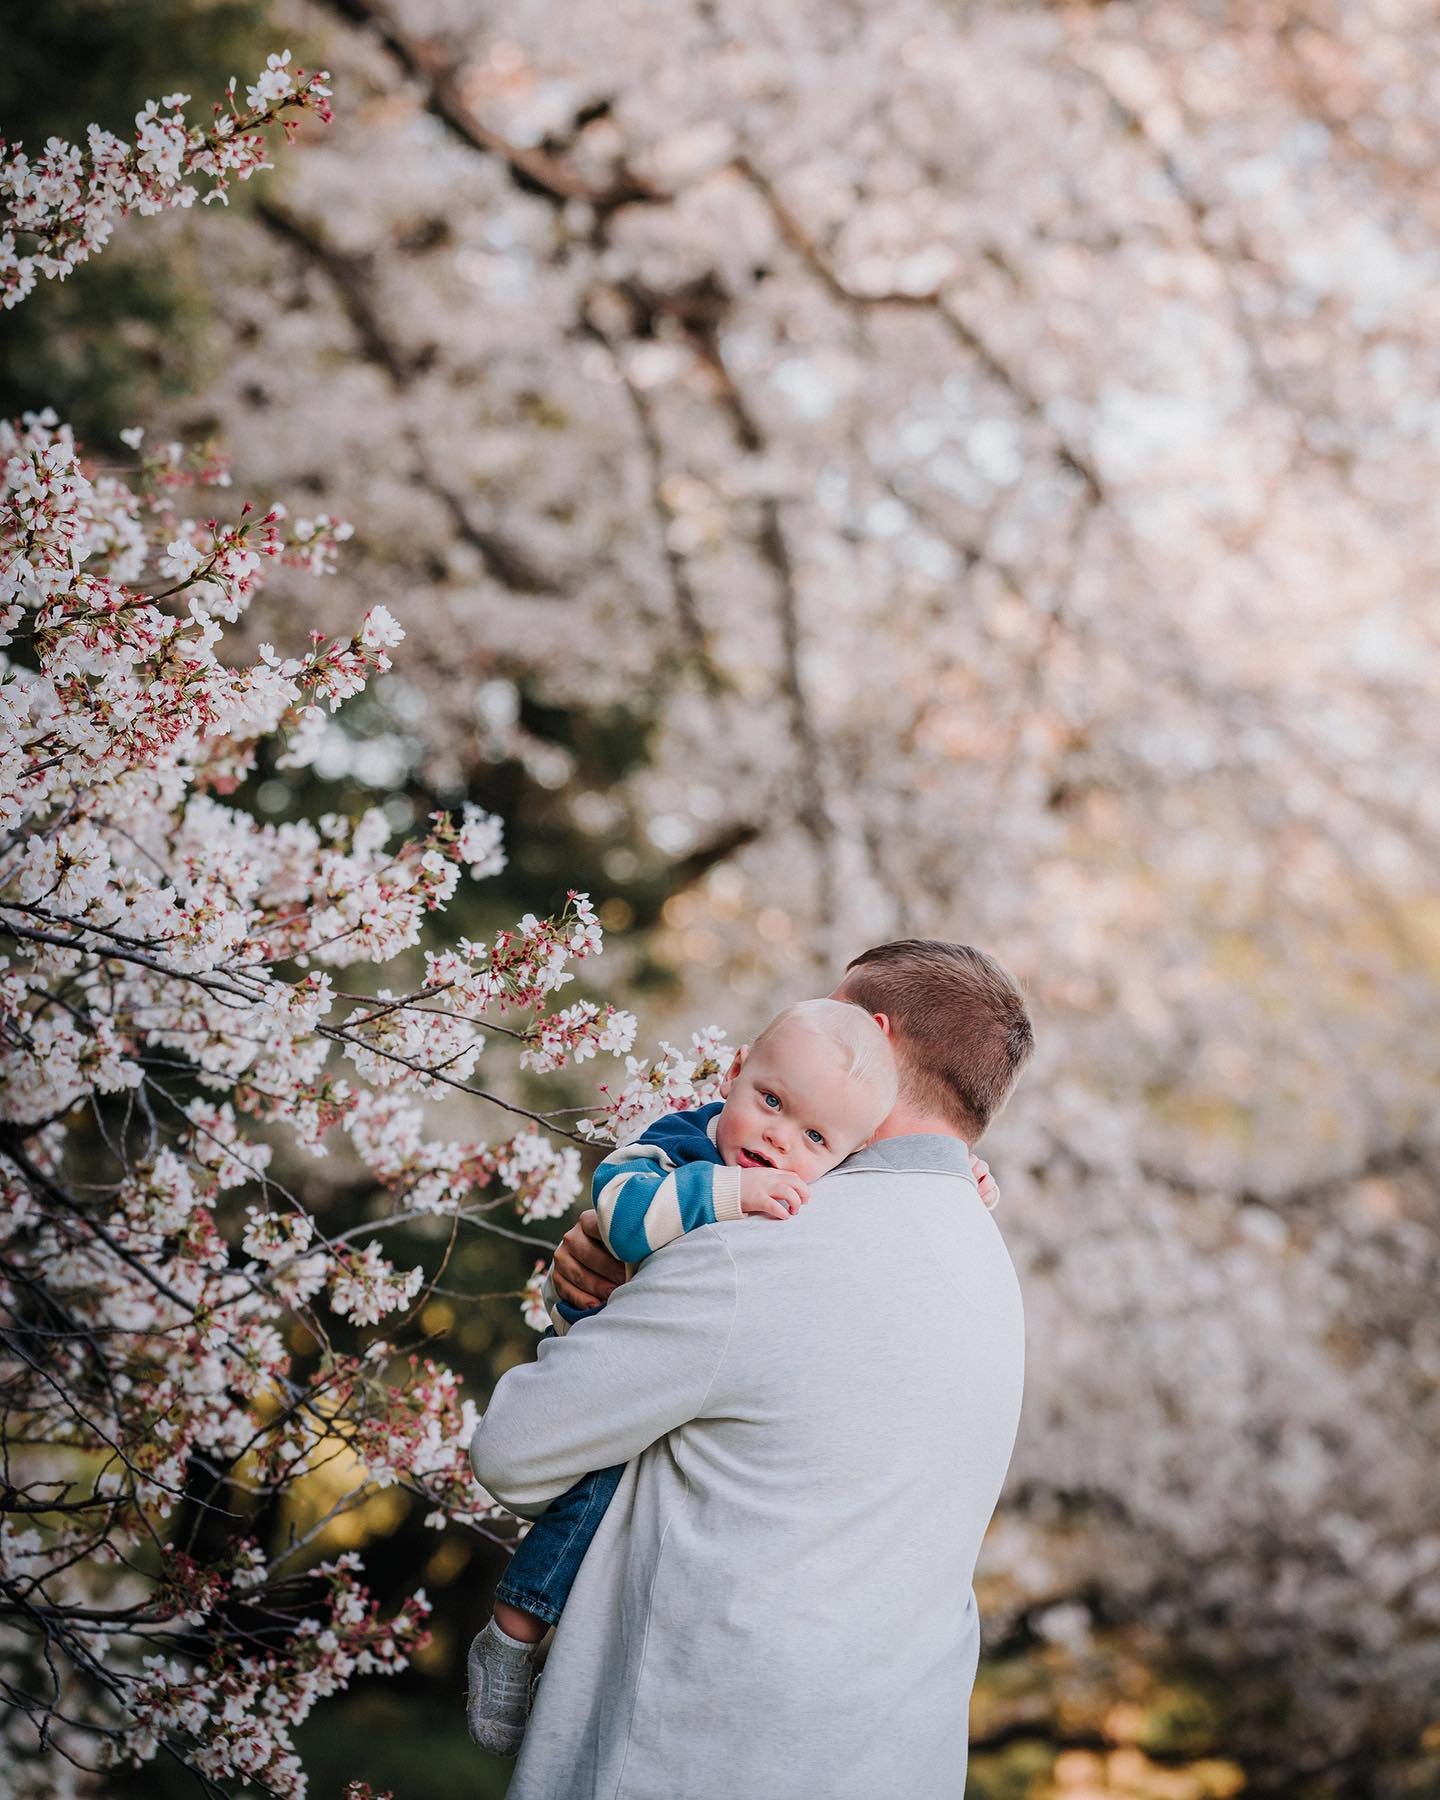 So much beauty and cuteness in one photo ❤️ #gomphotography #tokyophotographer #japanphotographer #tokyotrip #tokyovacationphotography #tokyofamilyphotographer #fatherandson #tokyocherryblossom #tokyophotoshoot #japanphotoshoot #japantrip